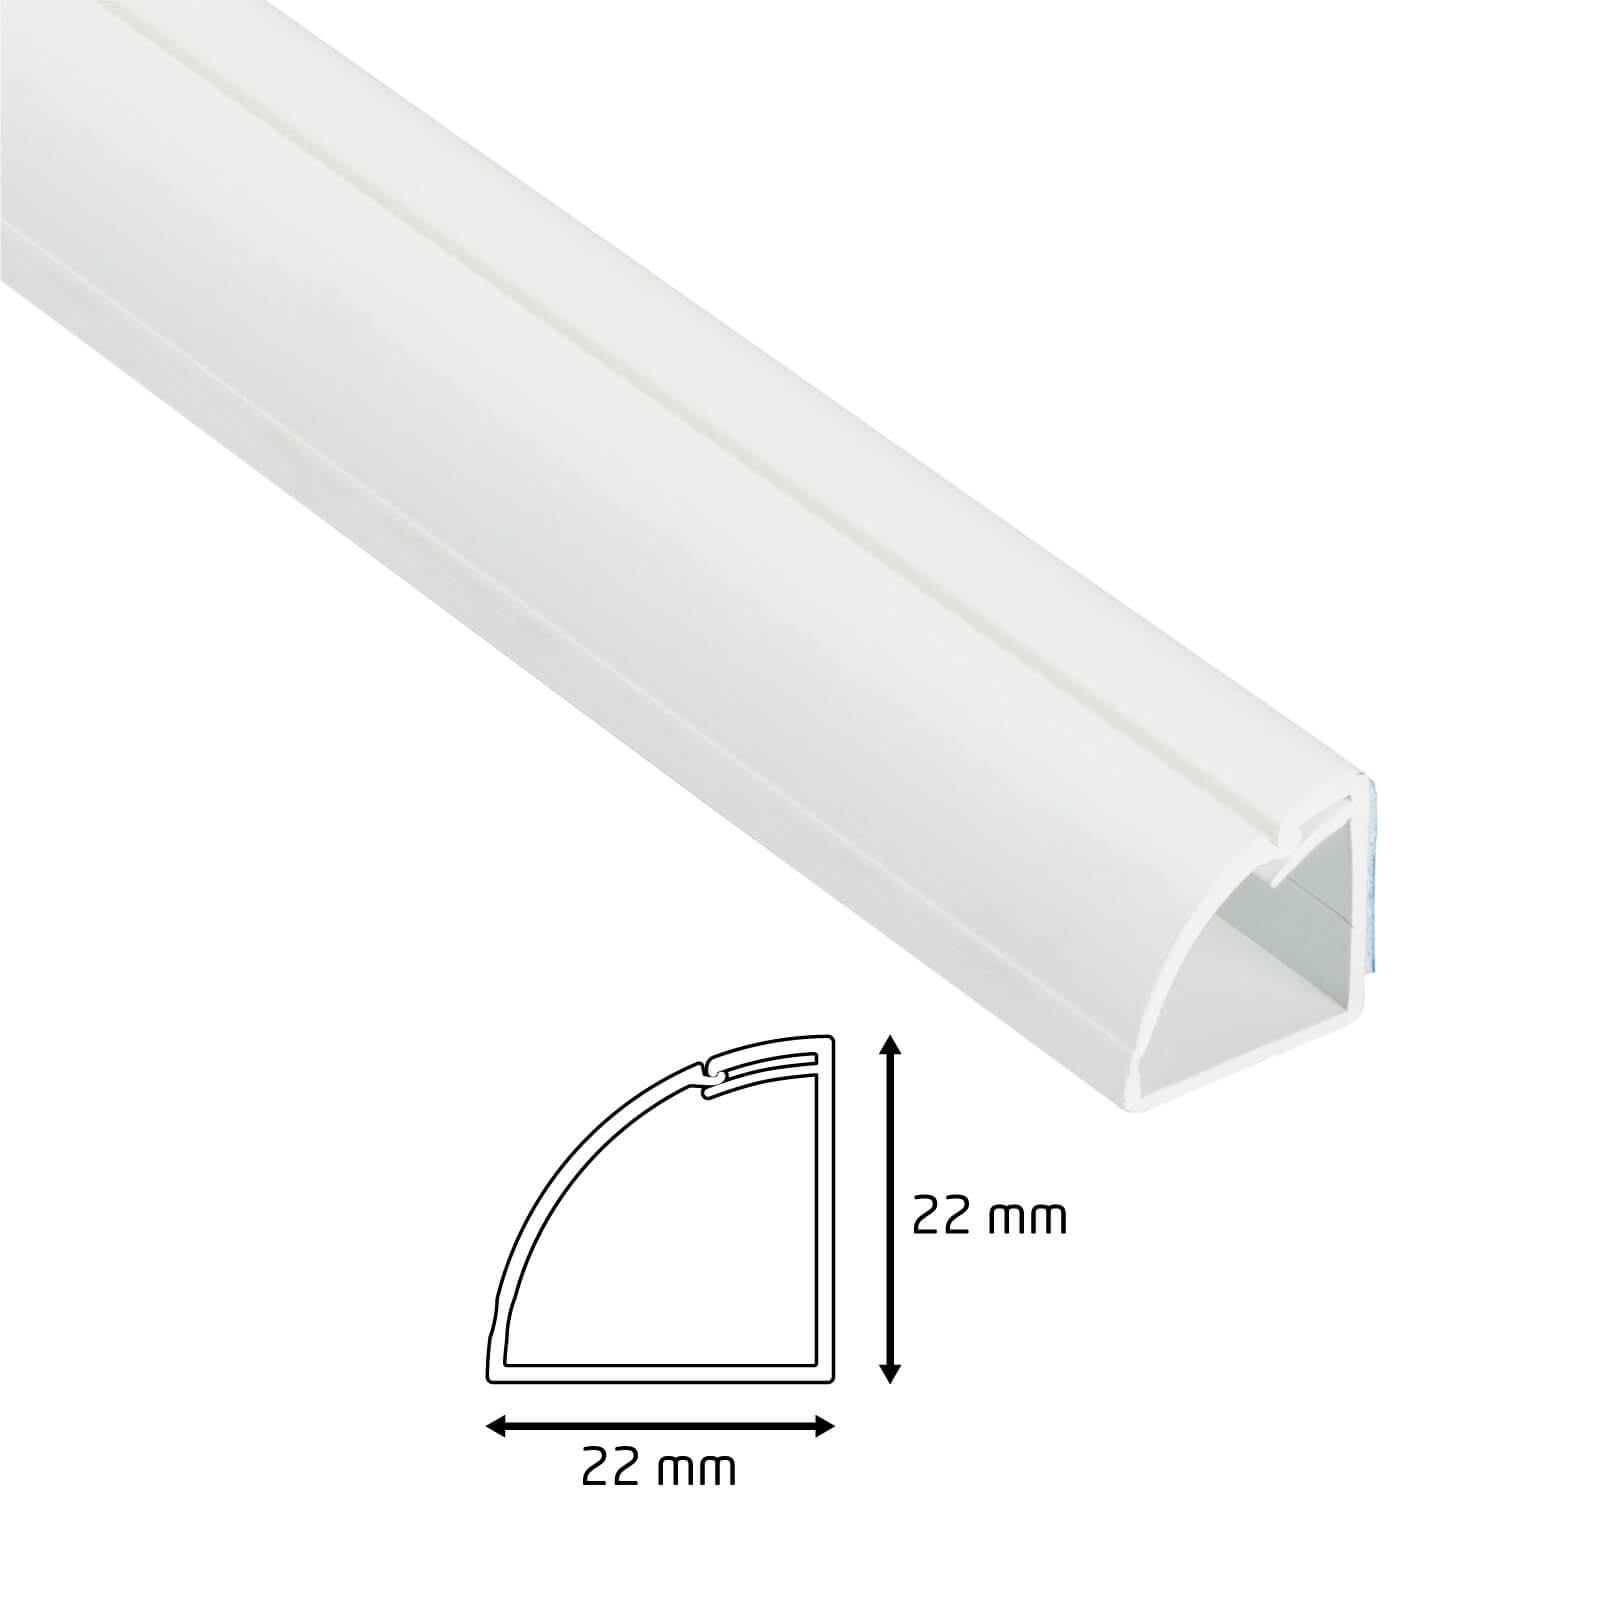 D-Line Quadrant Trunking Multipack 3 x 22mm x 22mm x 1-metre Lengths & Accessories - White